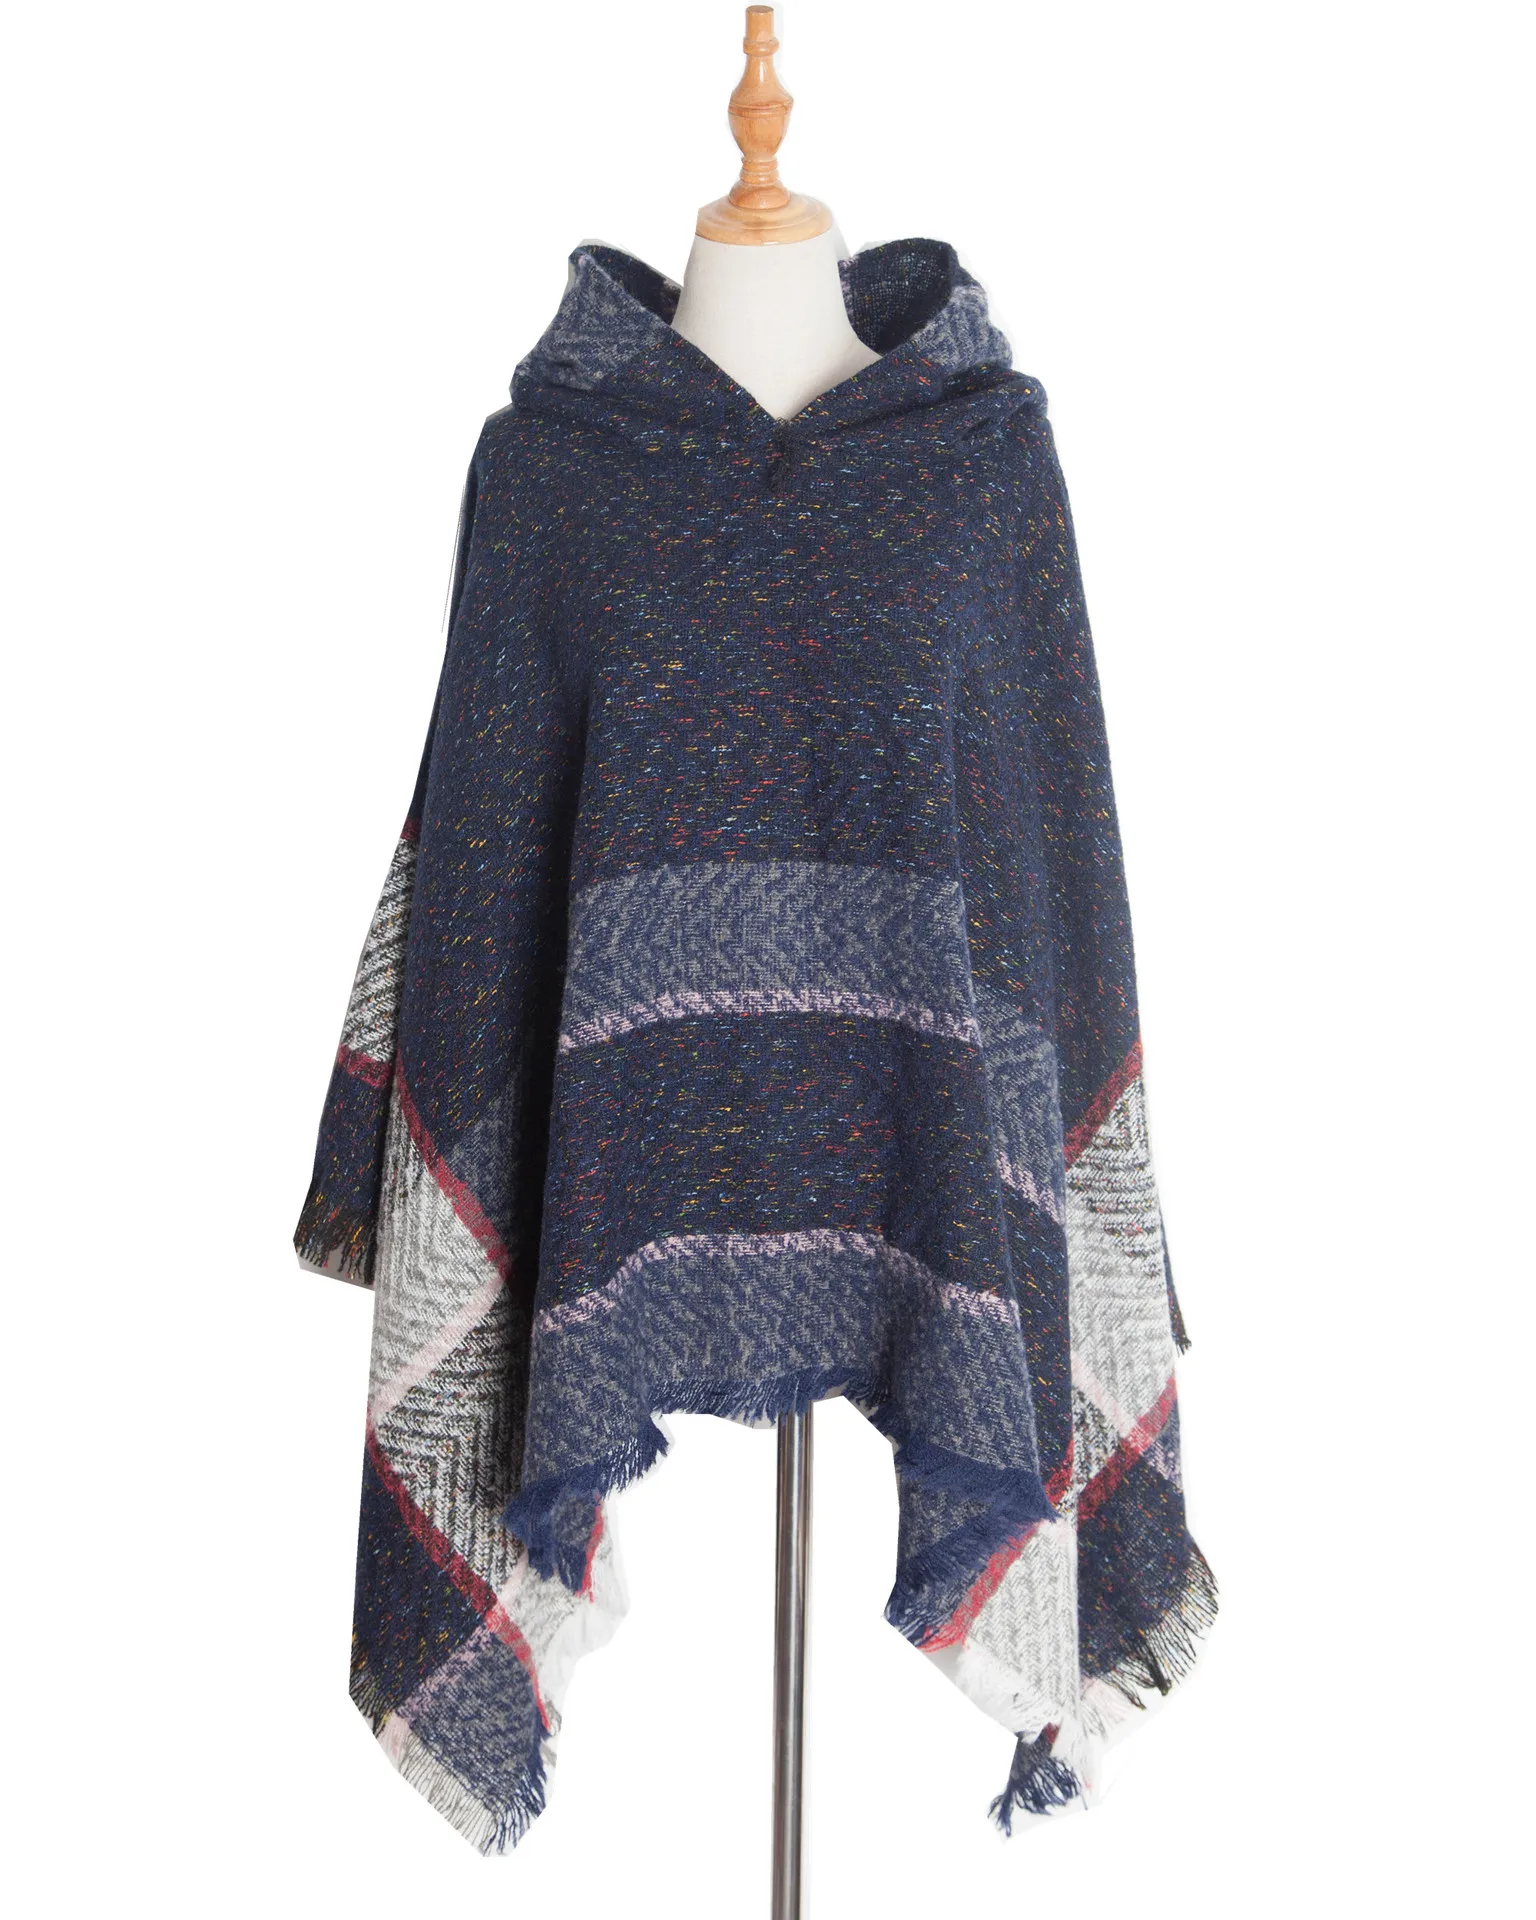 New Autumn Winter Fishbone Pattern Women's Hooded Cape Pullover Cape Women Poncho Lady Capes Navy Cloaks spring autumn new pullover cape women hollow flower knitting poncho capes batwing sleeves shawls sunscreen solid cloak blue